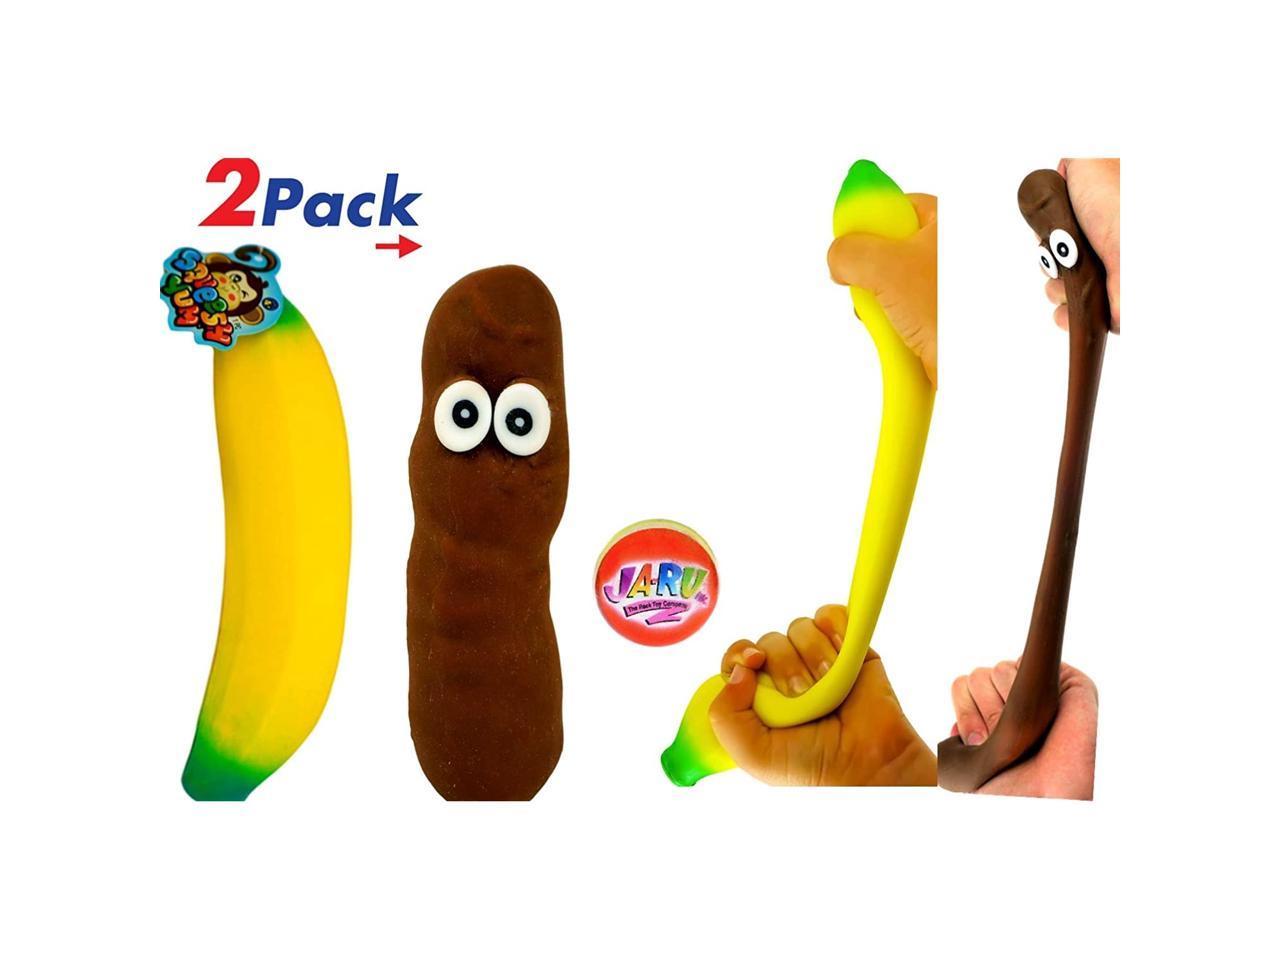 JA-RU Super Stretchy Banana Squish Yum Buh Nay Nay and 1 Collectable Pack of 2 